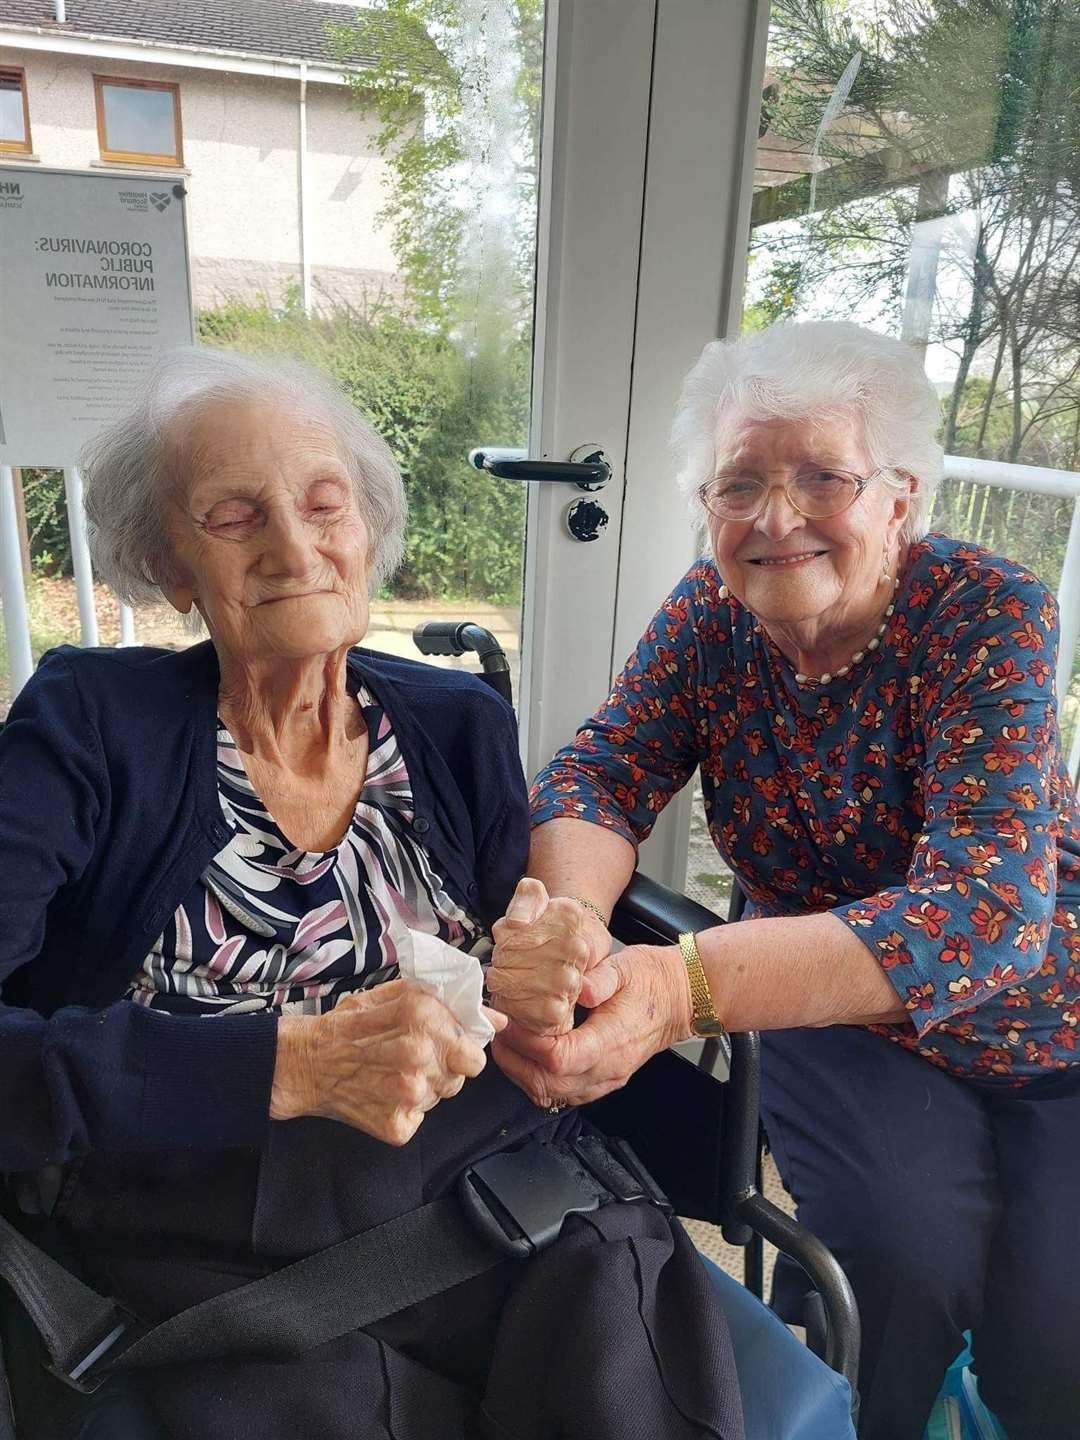 Betty was joined by her good friend Jean to mark the occasion.